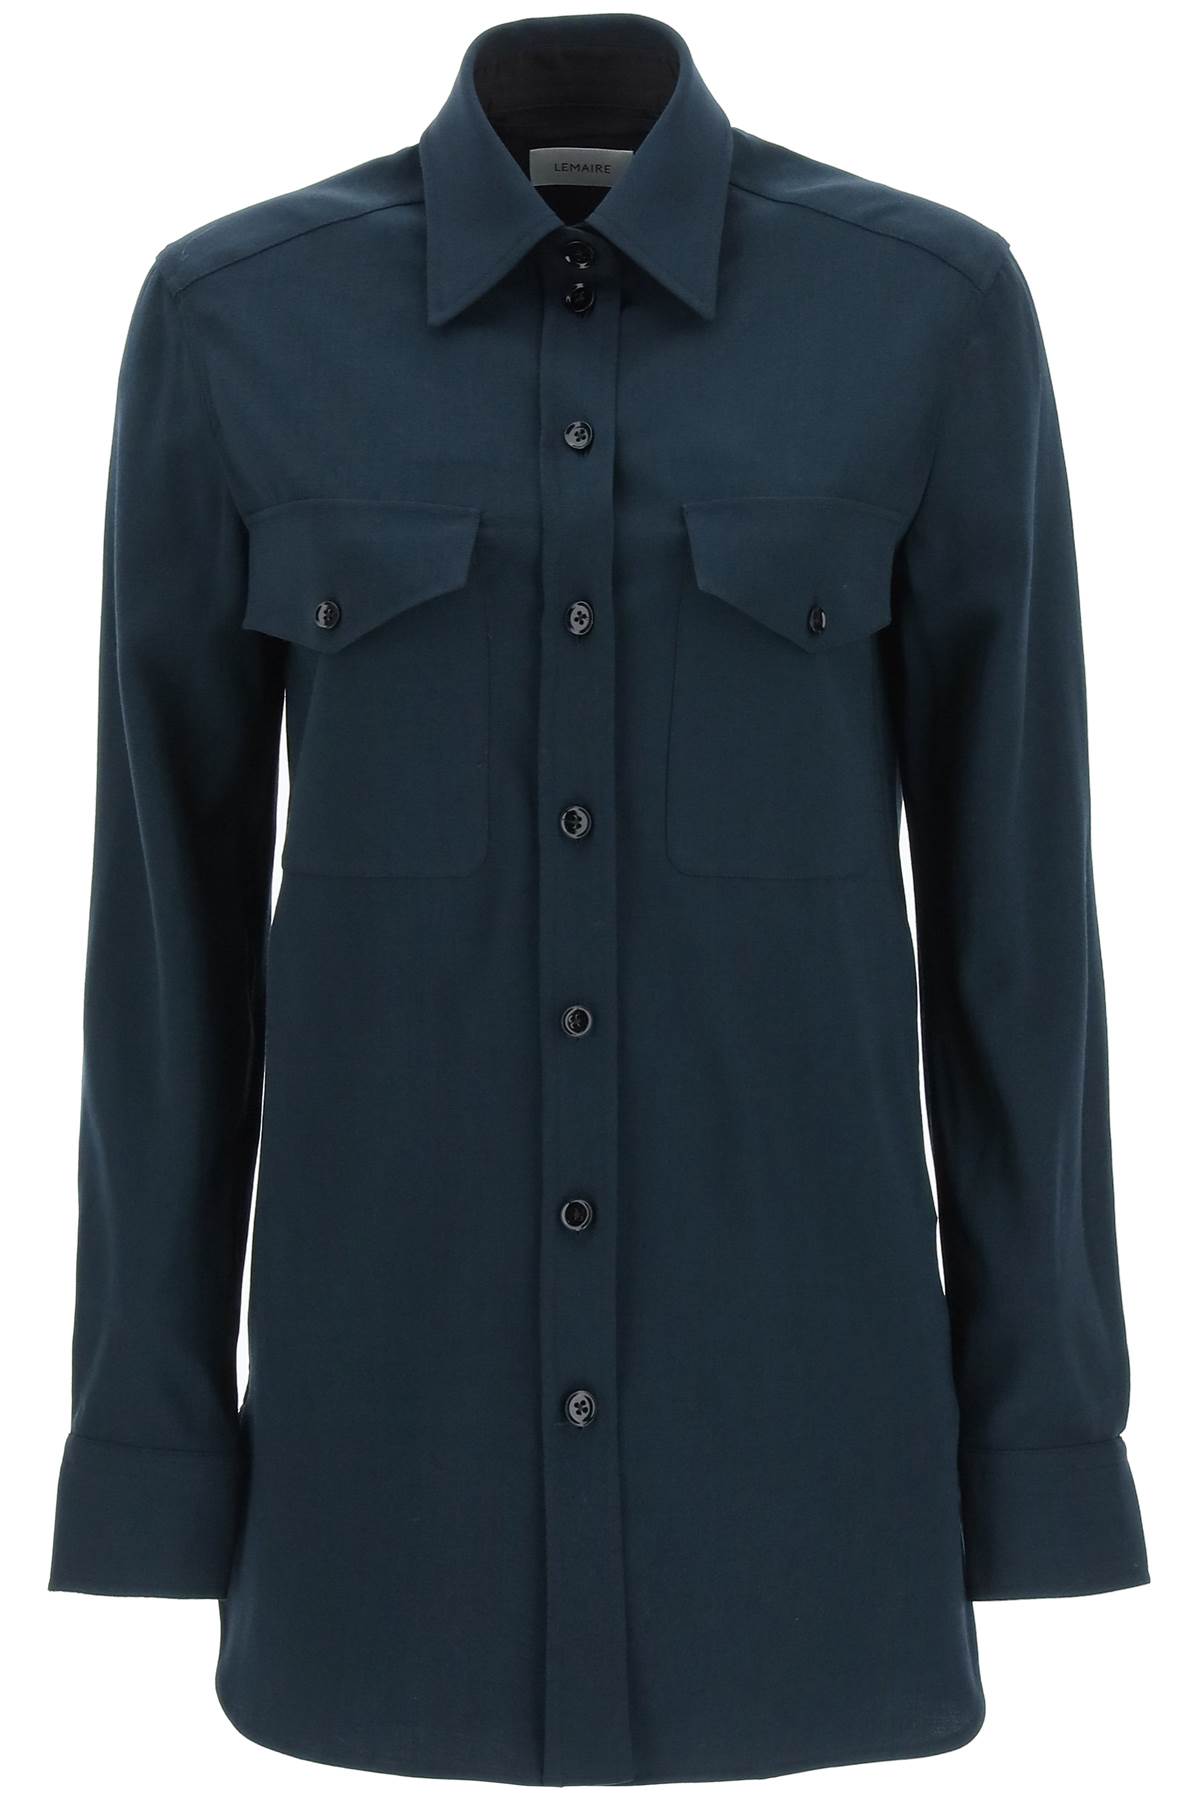 Lemaire Two Pockets Shirt